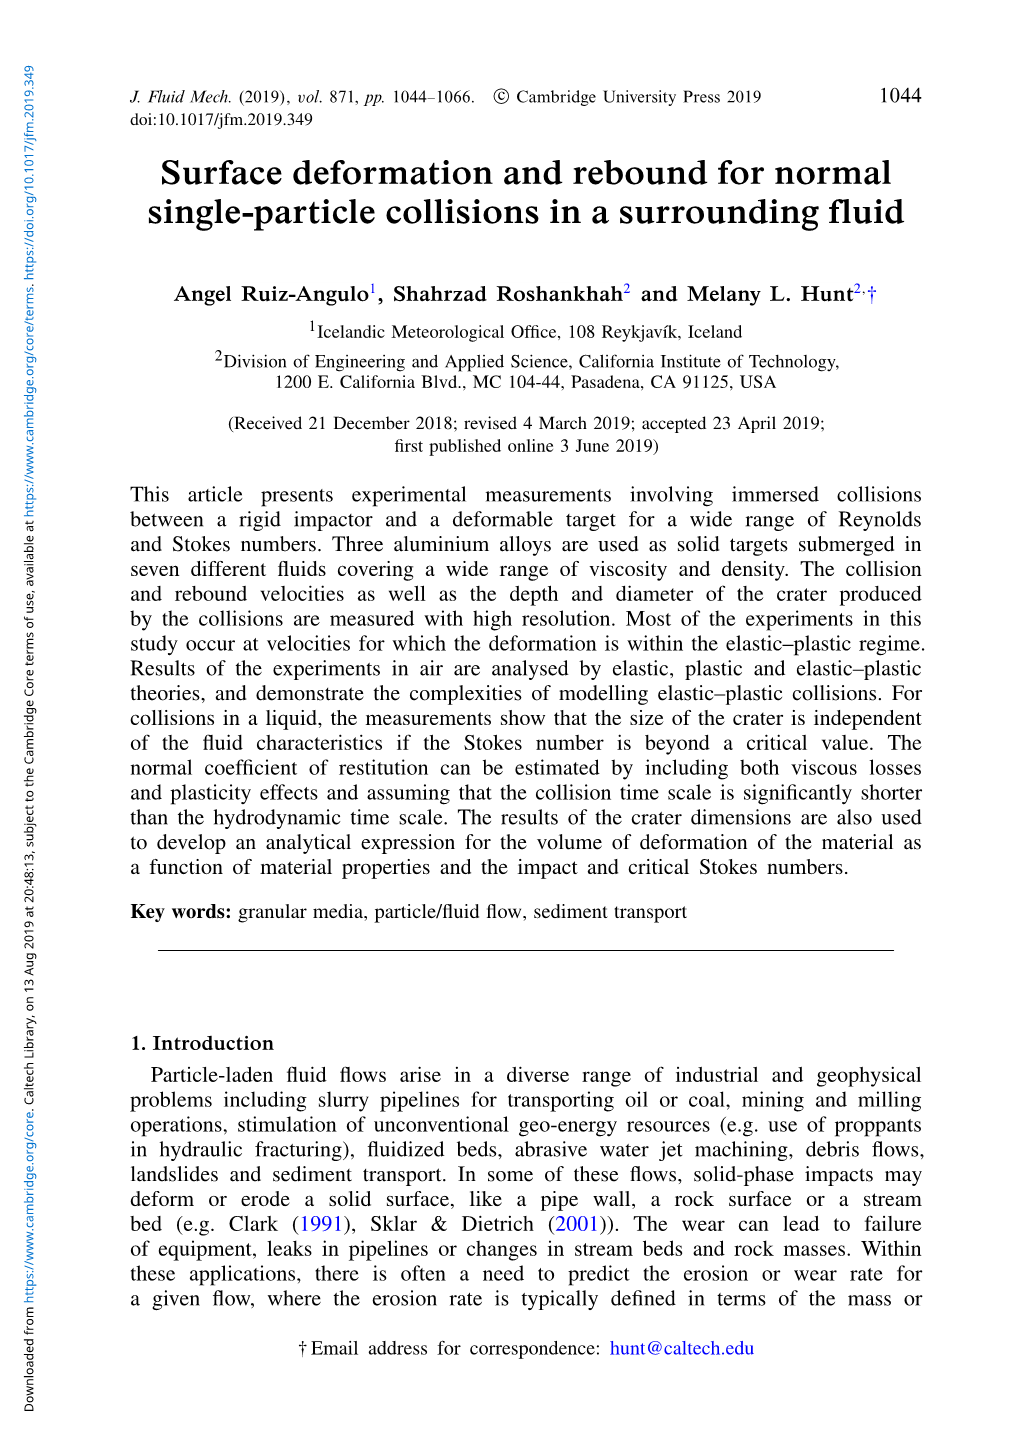 Surface Deformation and Rebound for Normal Single-Particle Collisions in a Surrounding ﬂuid